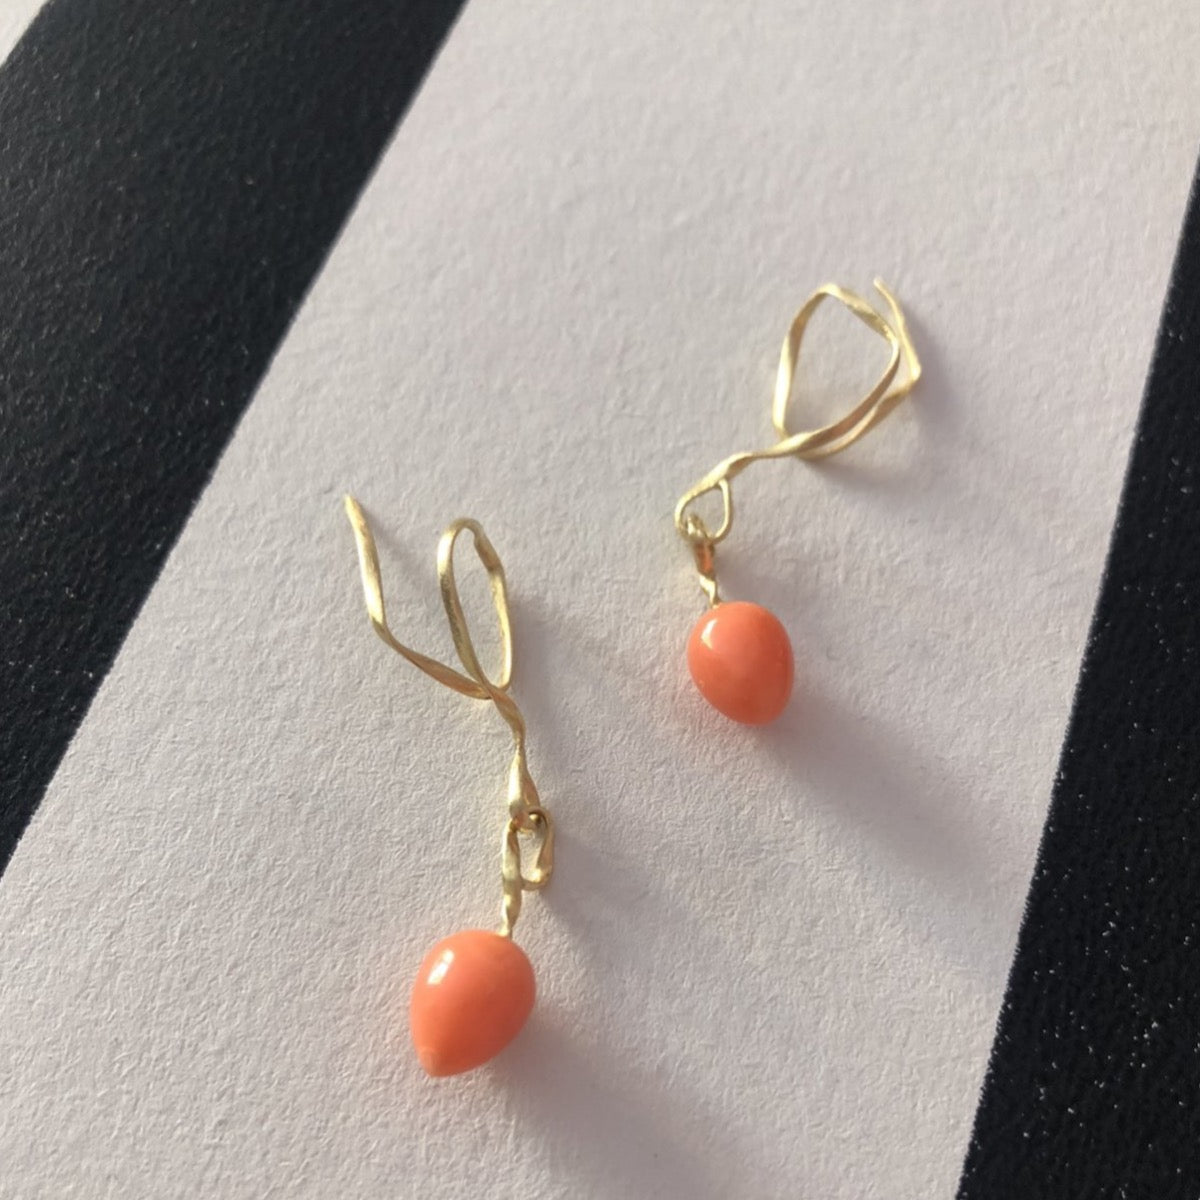 Flair earrings 18kt. and legal Corals